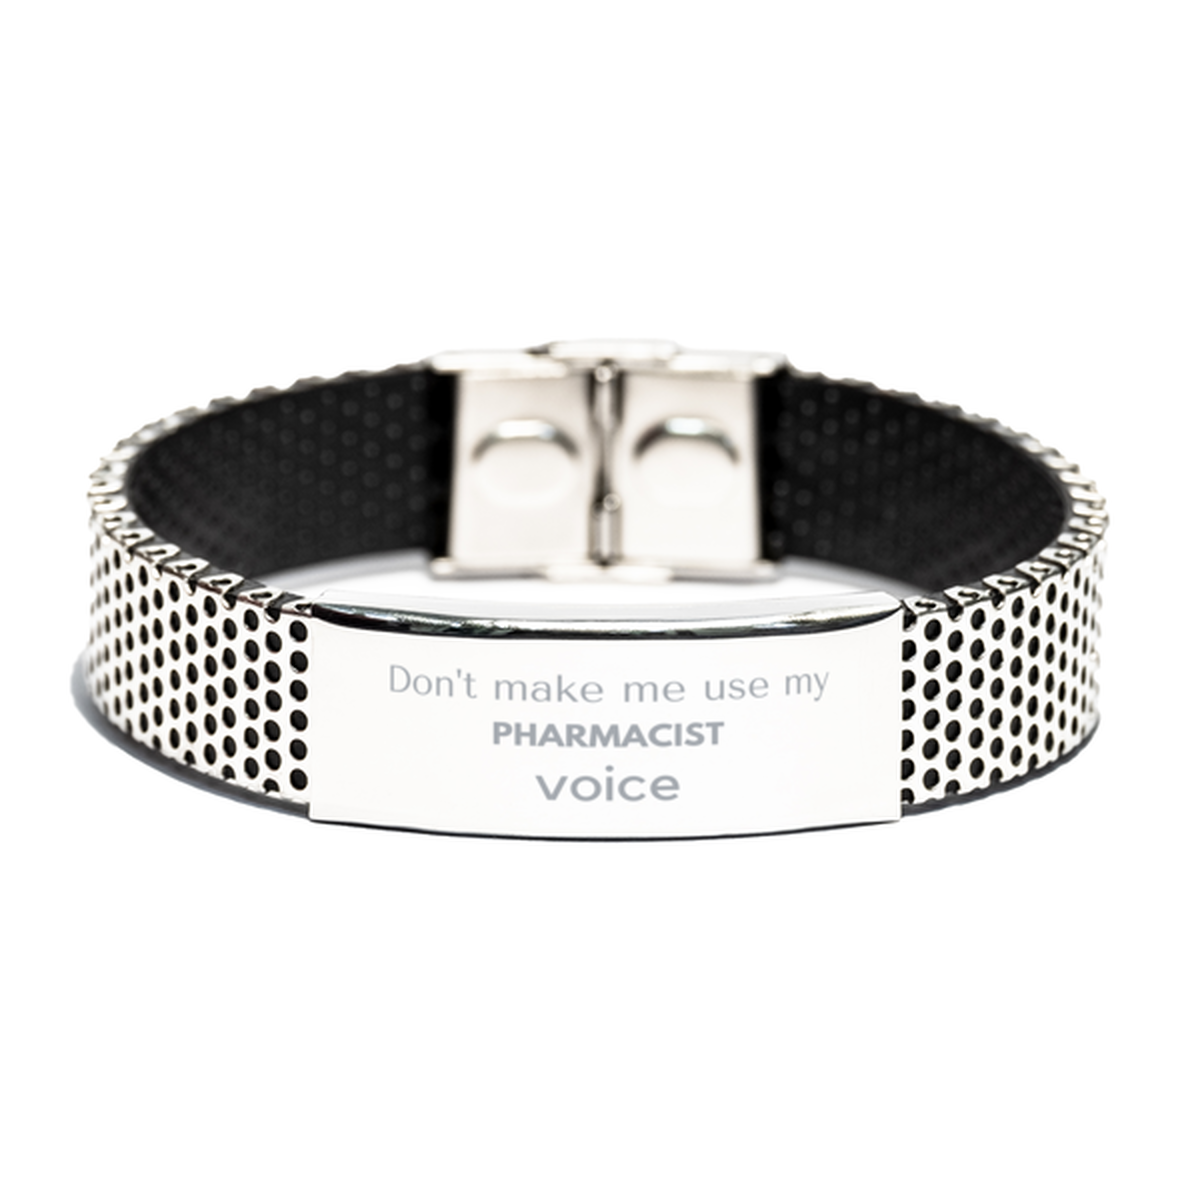 Don't make me use my Pharmacist voice, Sarcasm Pharmacist Gifts, Christmas Pharmacist Stainless Steel Bracelet Birthday Unique Gifts For Pharmacist Coworkers, Men, Women, Colleague, Friends